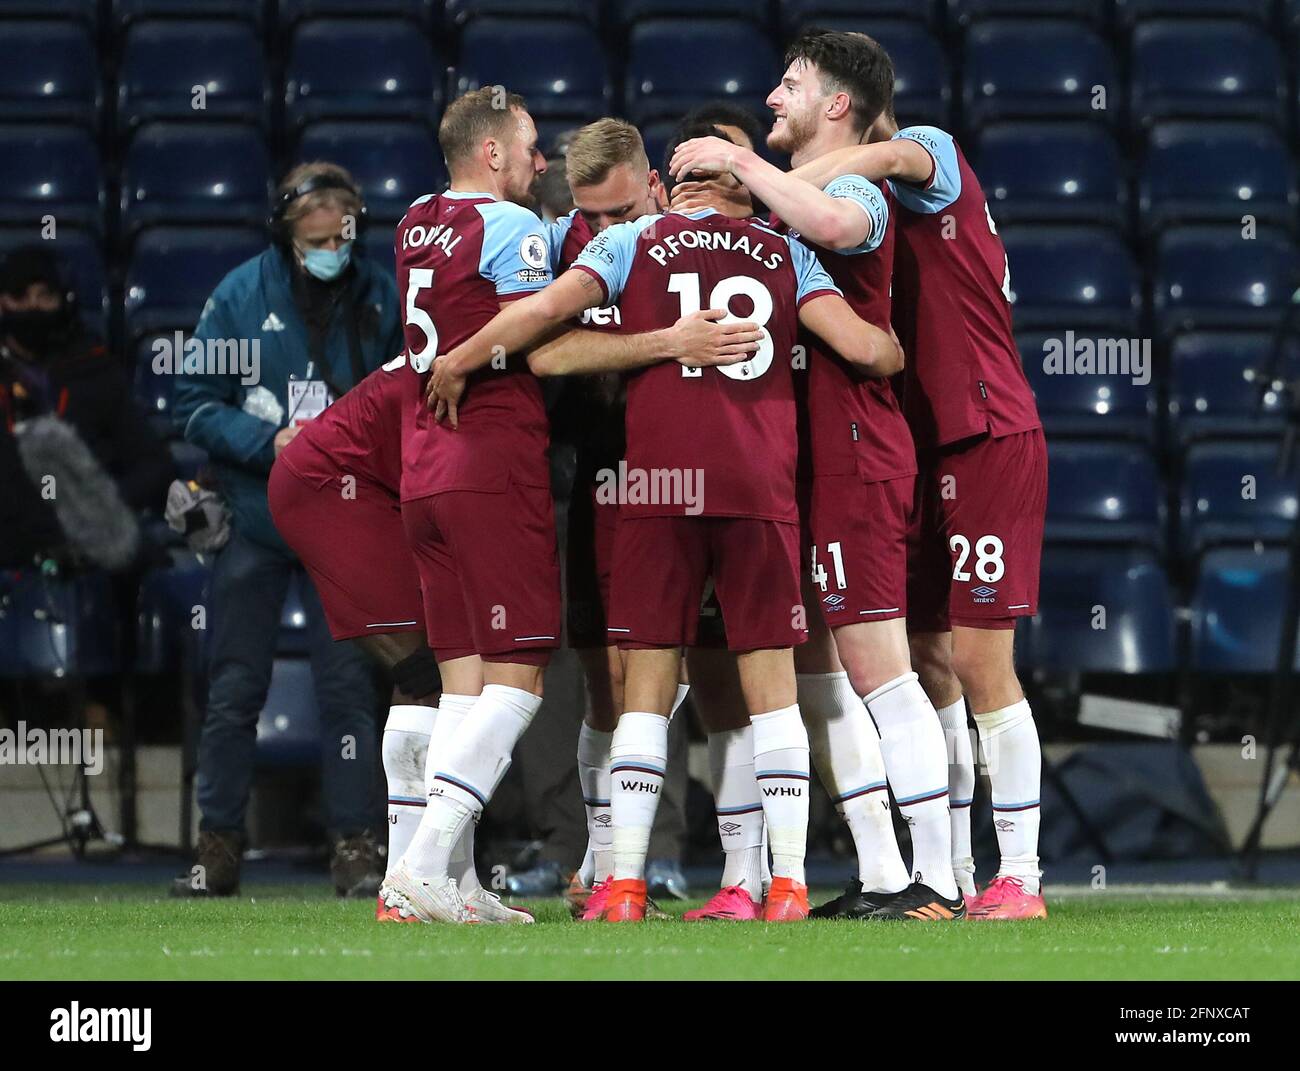 West Ham United's Michail Antonio (hidden) celebrates scoring their side's third goal of the game with team-mates during the Premier League match at The Hawthorns, West Bromwich. Picture date: Wednesday May 19, 2021. Stock Photo